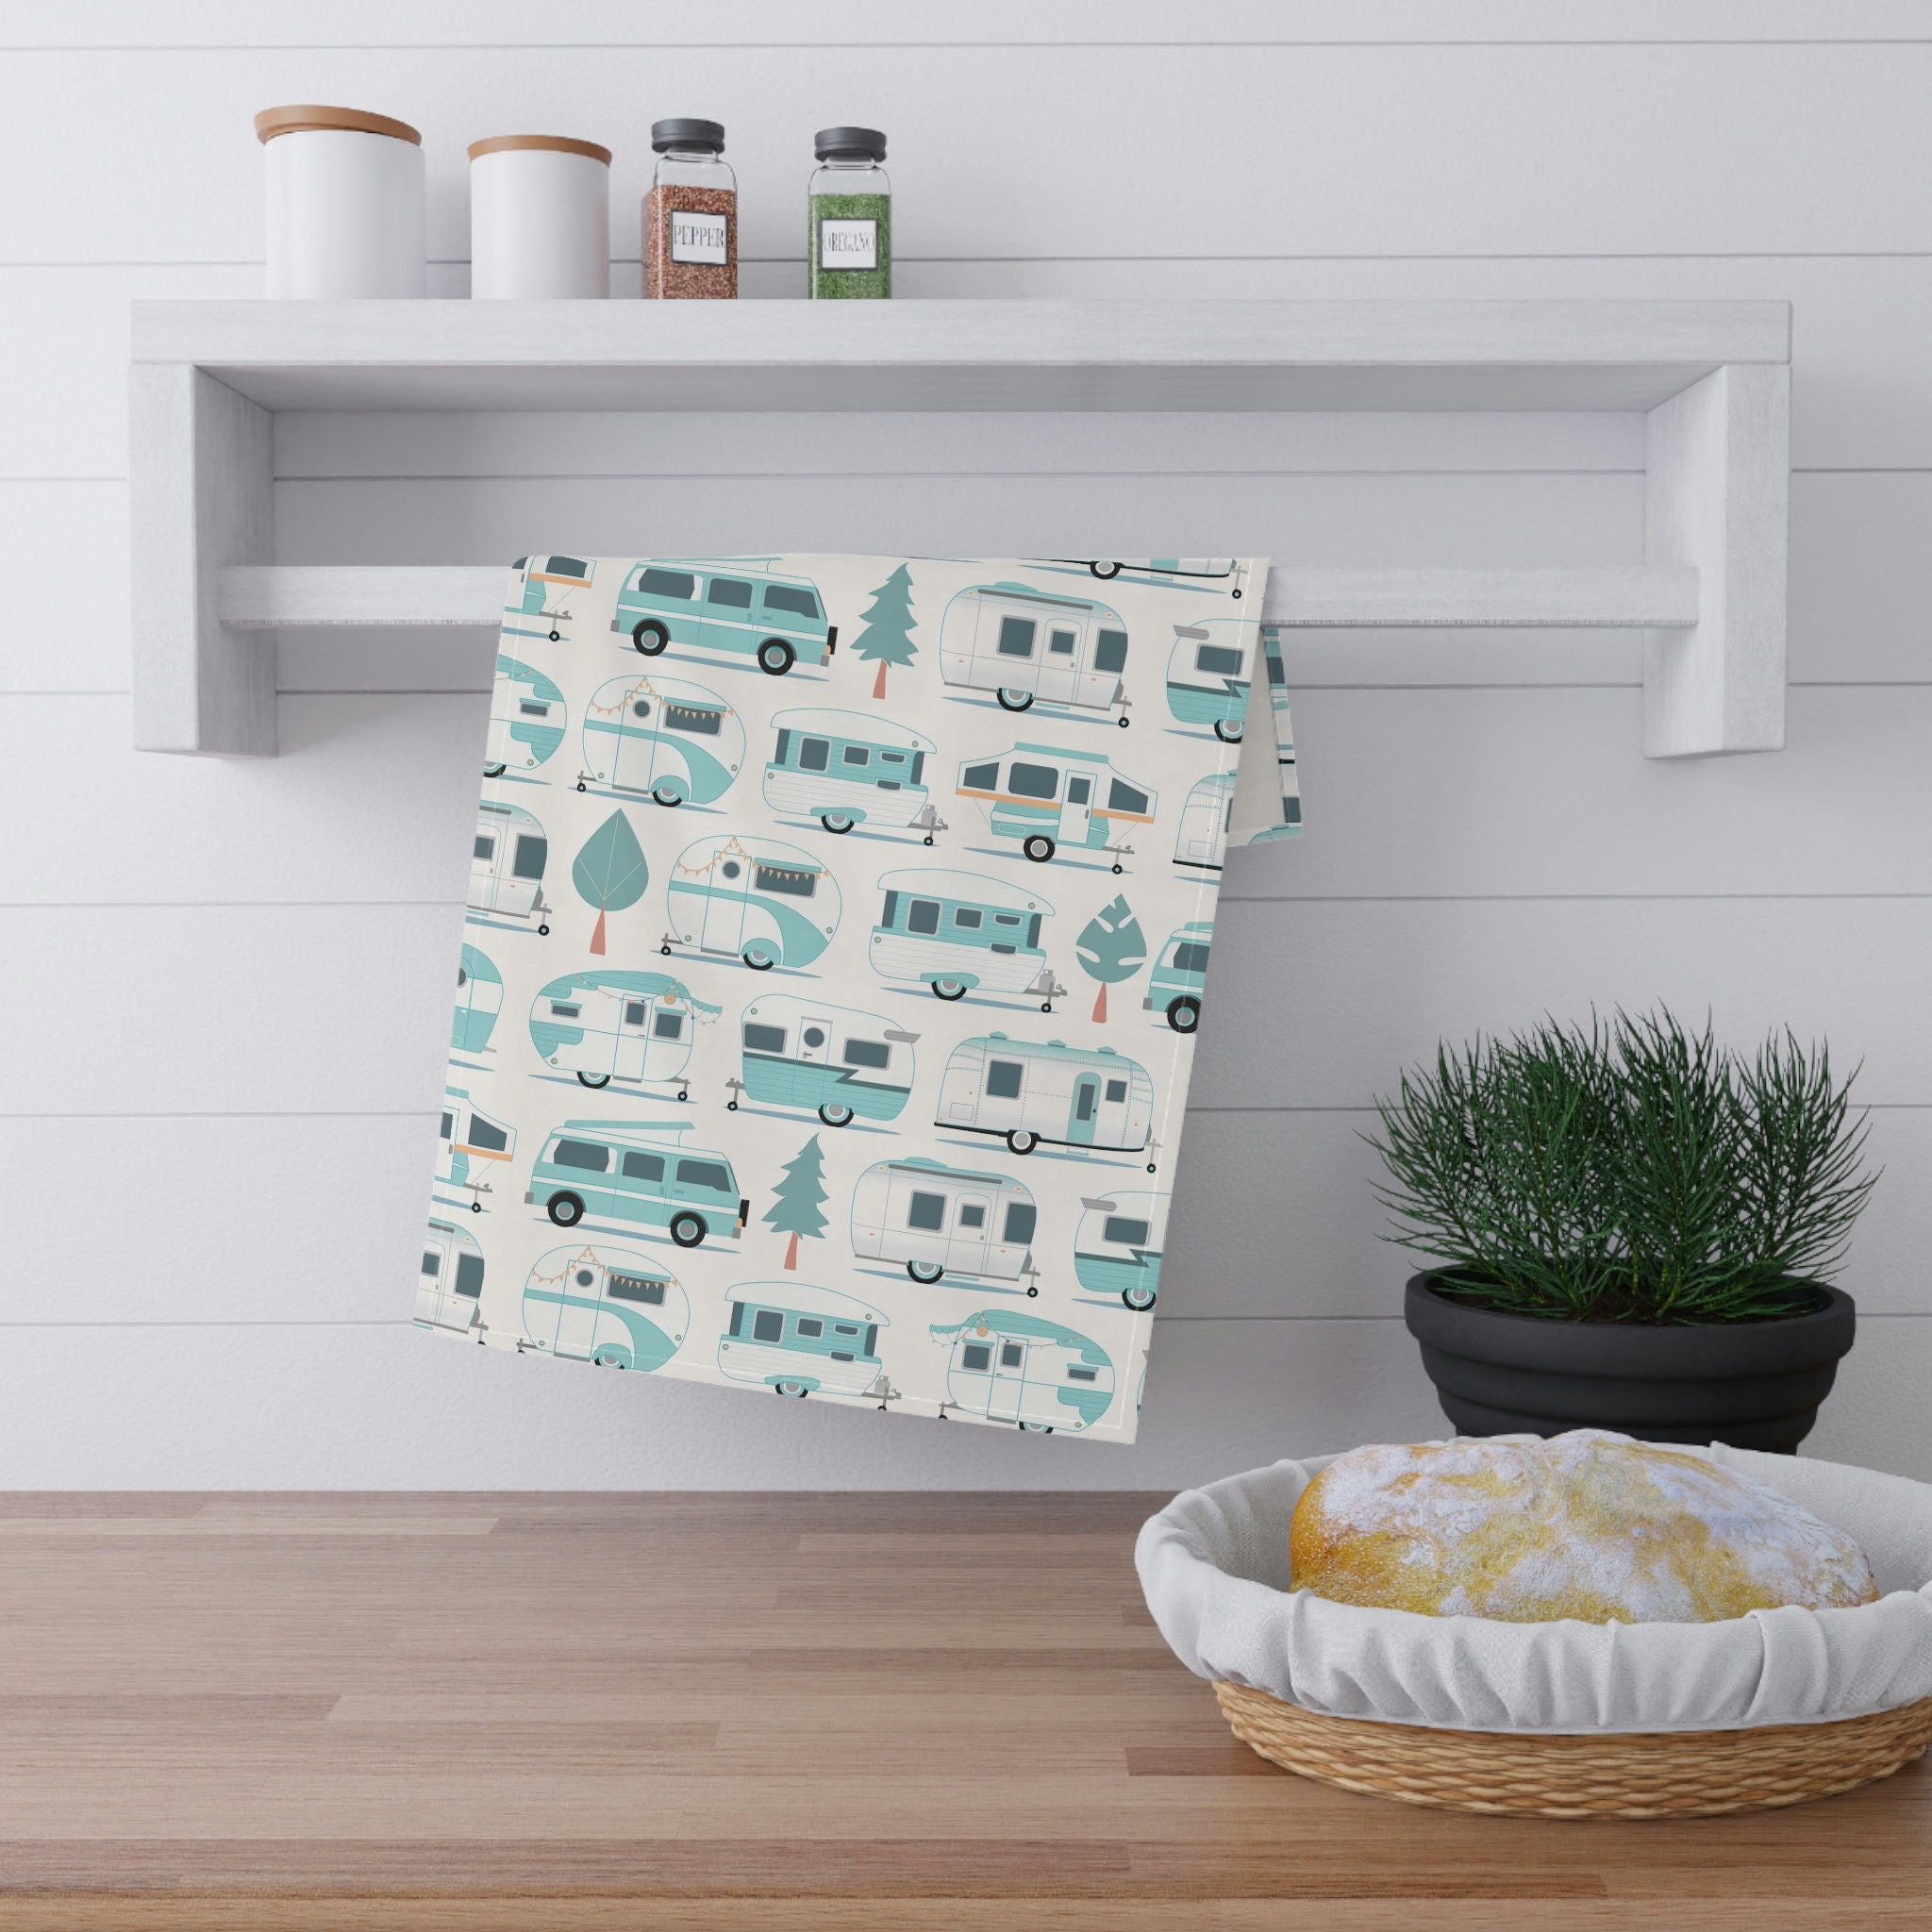 I Heart Camping & Happy Camper Set of 2 Kitchen Tea Towels by Kay Dee